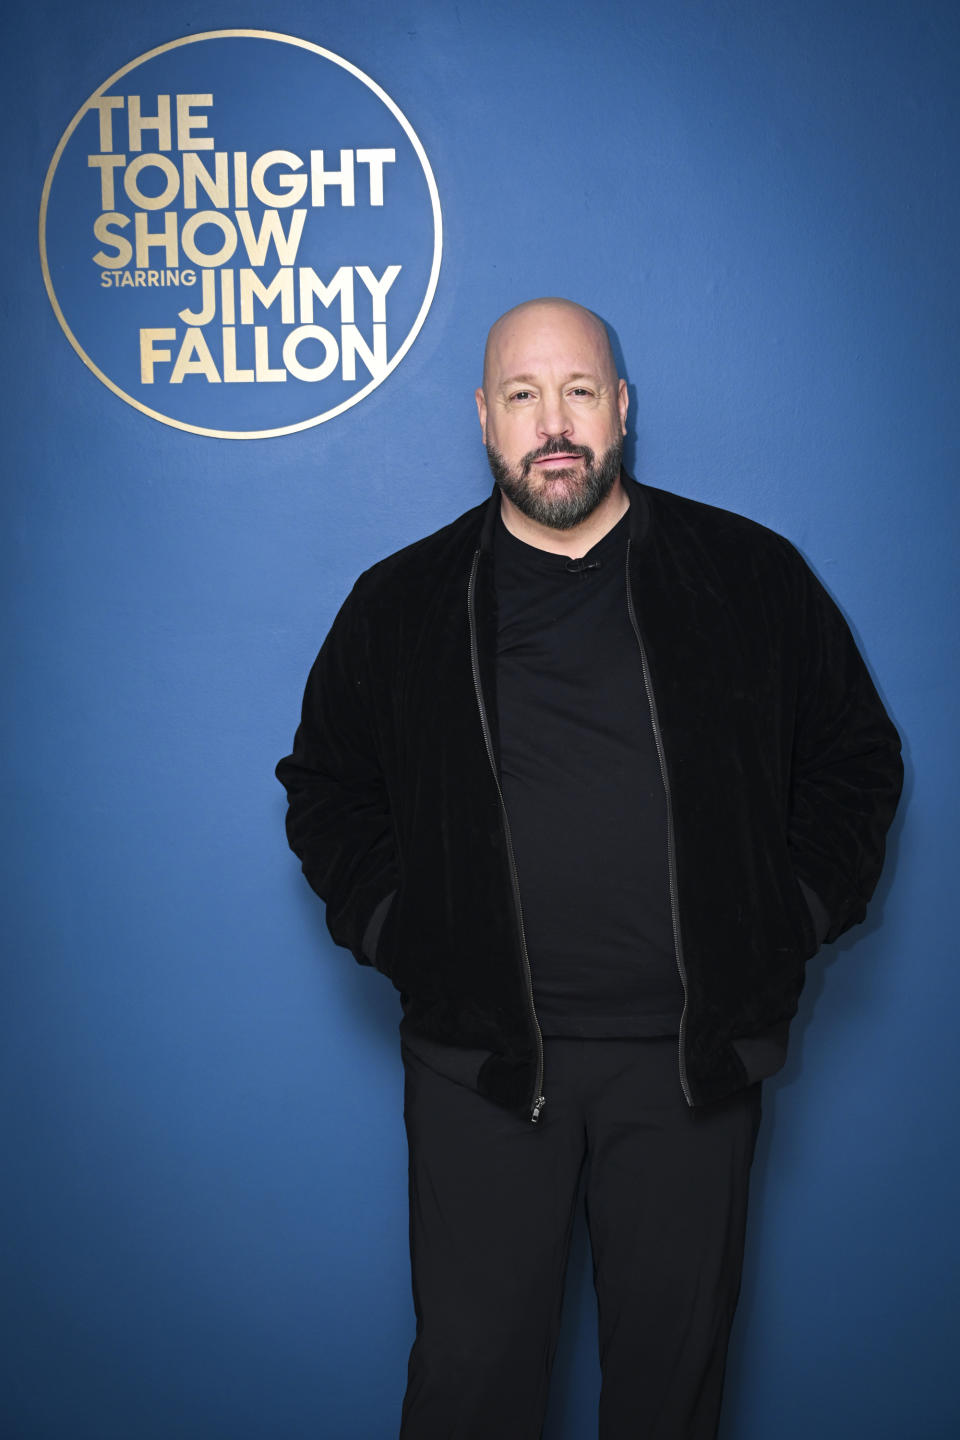 Kevin James stands in front of The Tonight Show Starring Jimmy Fallon sign, wearing a black outfit and jacket